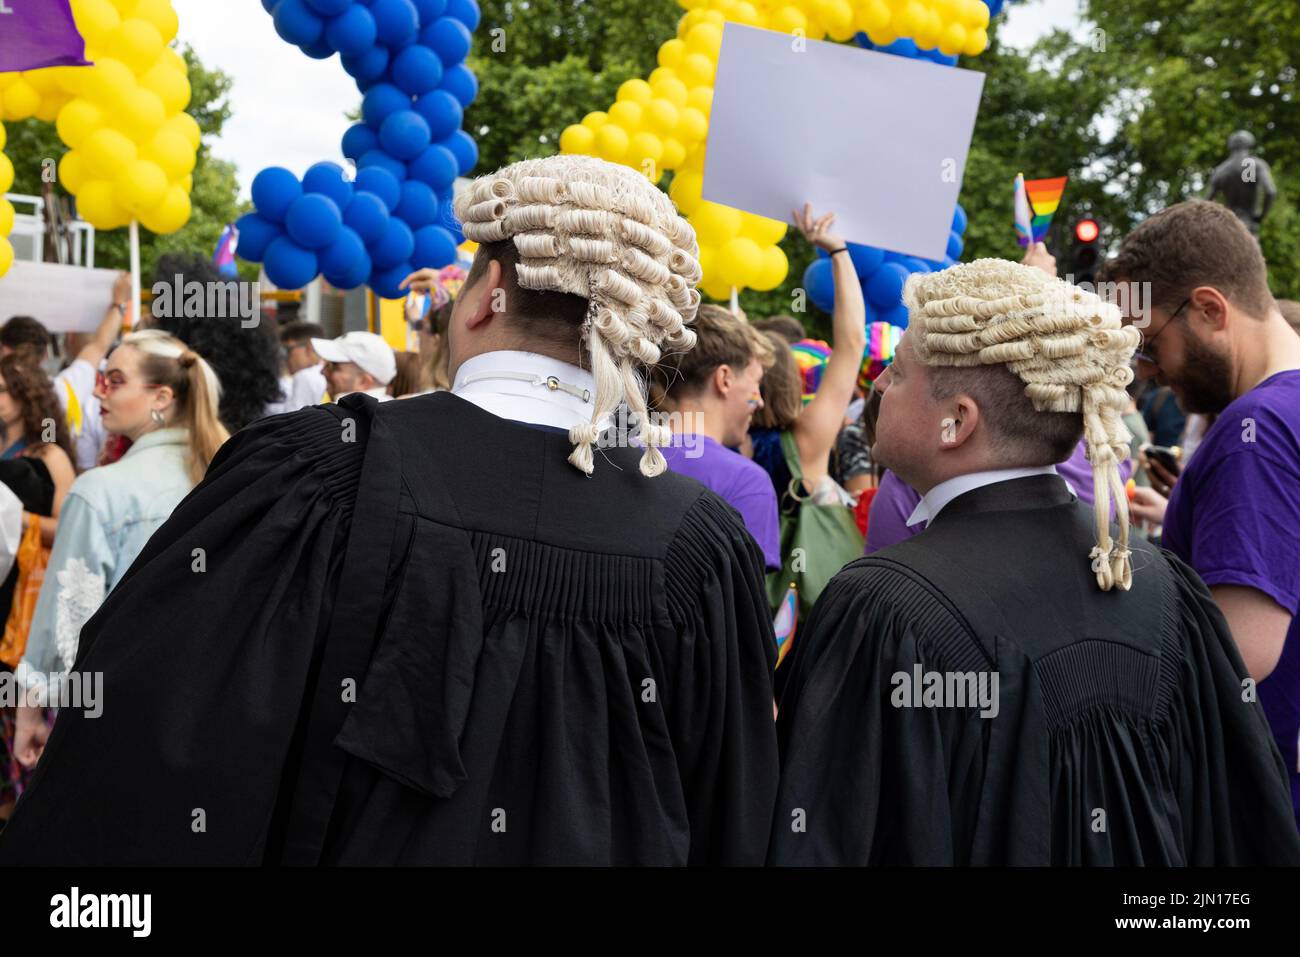 Barristers march as part of the Legal block at  London Pride 2022, dressed in traditional gowns and wigs Stock Photo